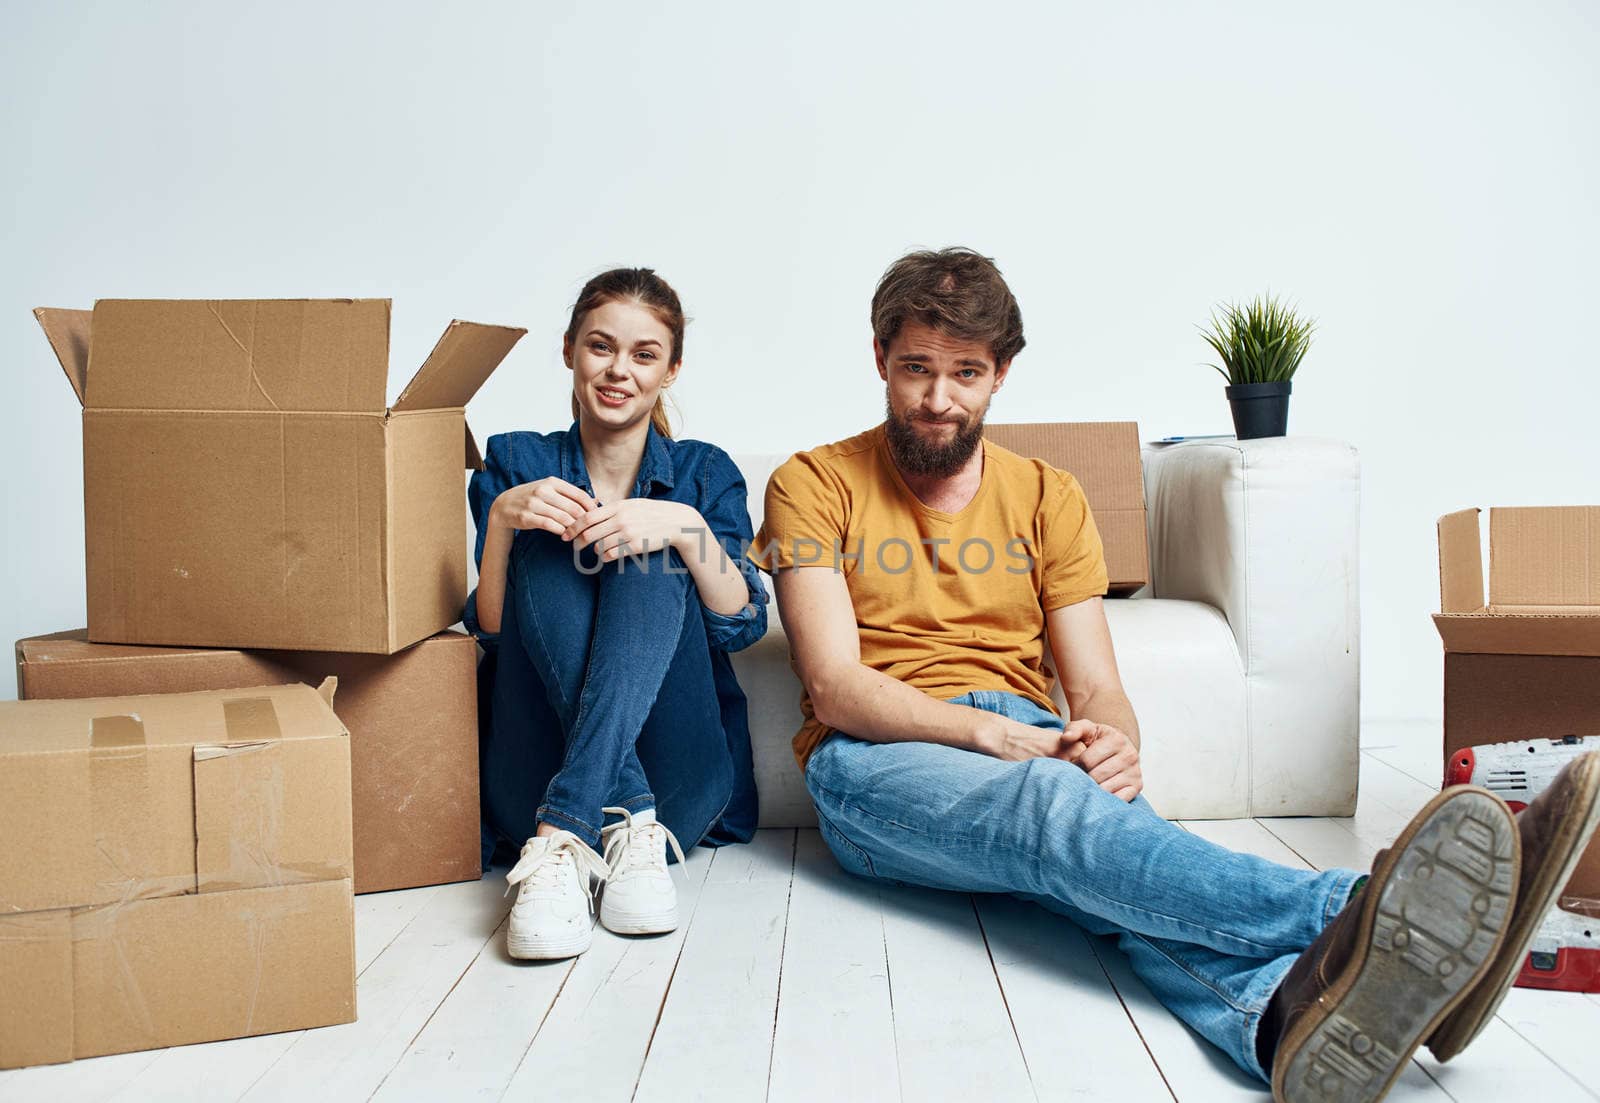 A man and a woman with boxes are moving. Well, an apartment is being renovated by a family. High quality photo